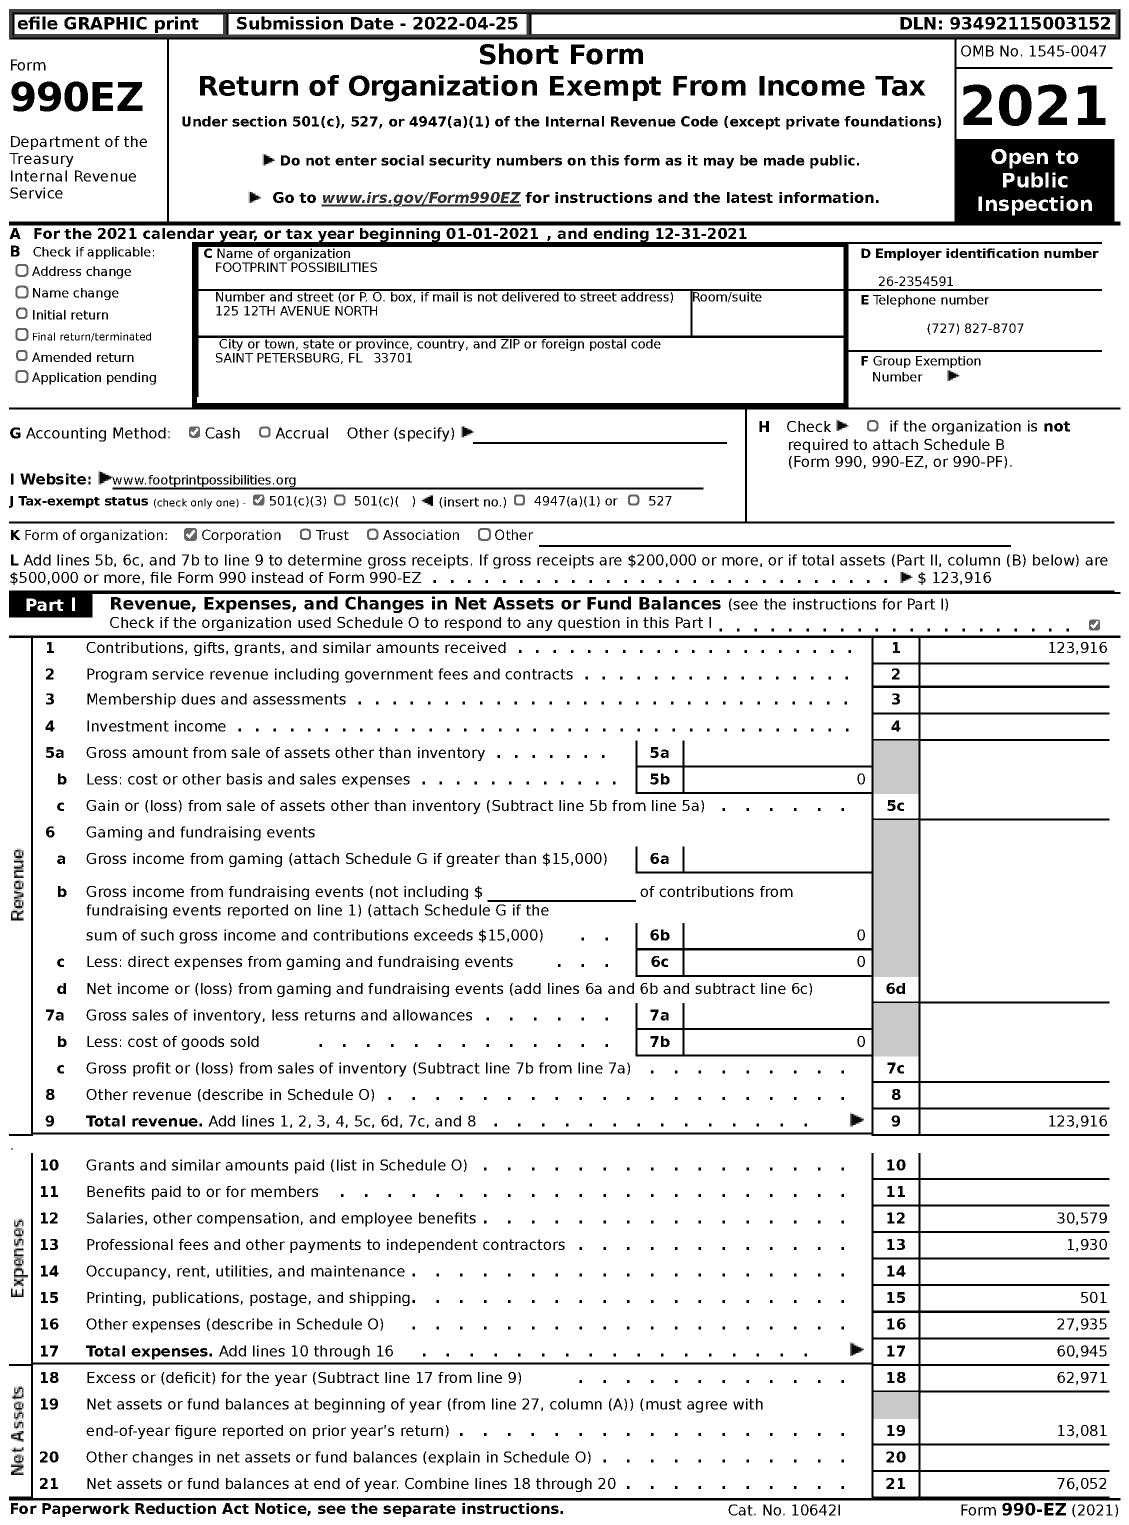 Image of first page of 2021 Form 990EZ for Footprint Possibilities